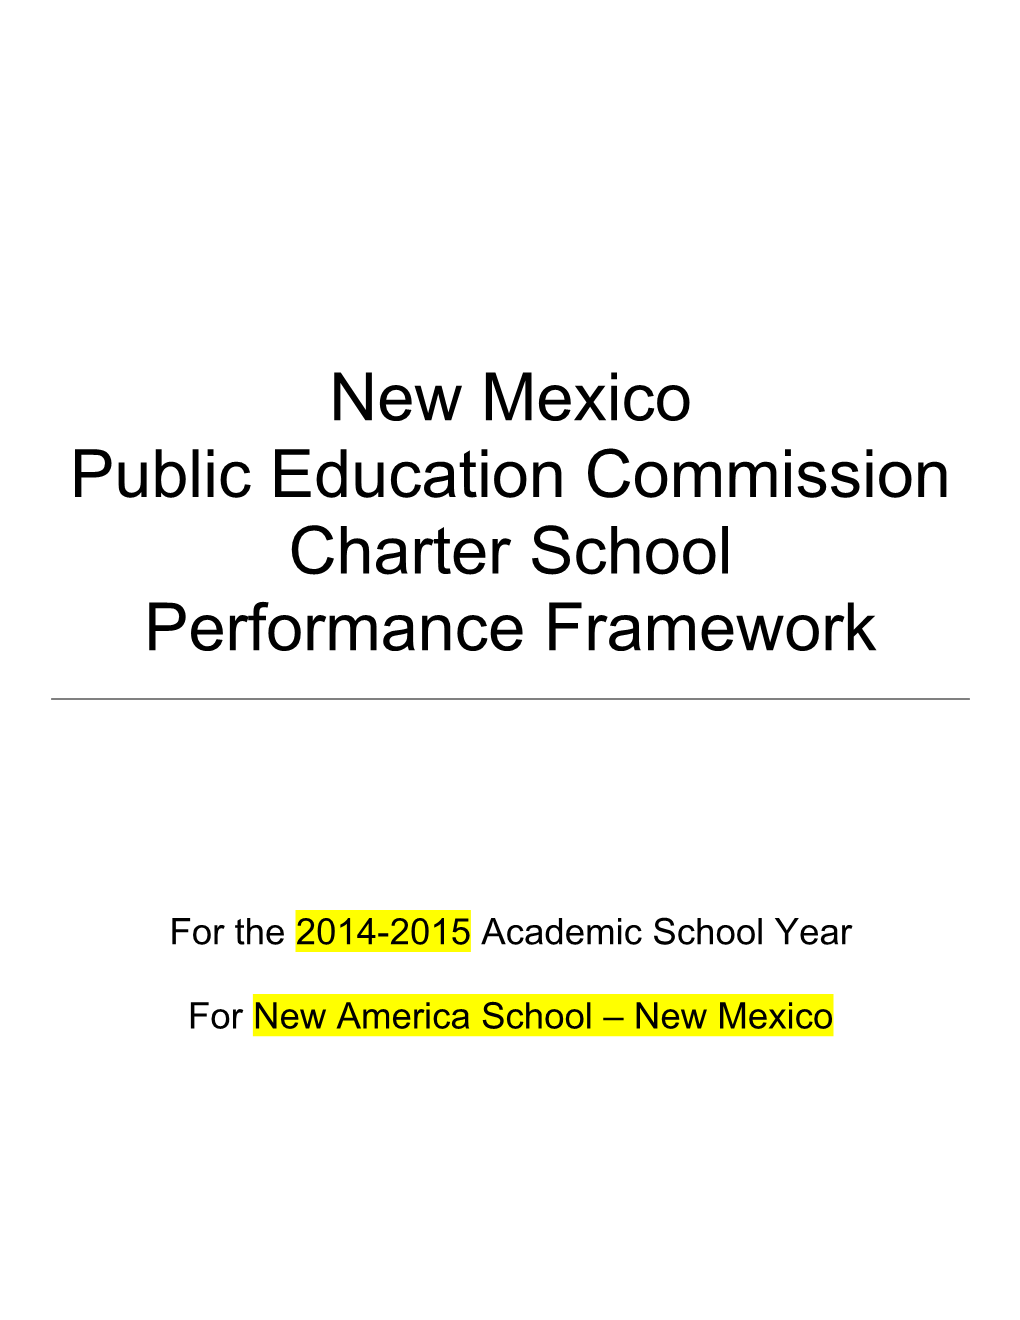 New Mexico Public Education Commission Charter School Performance Framework